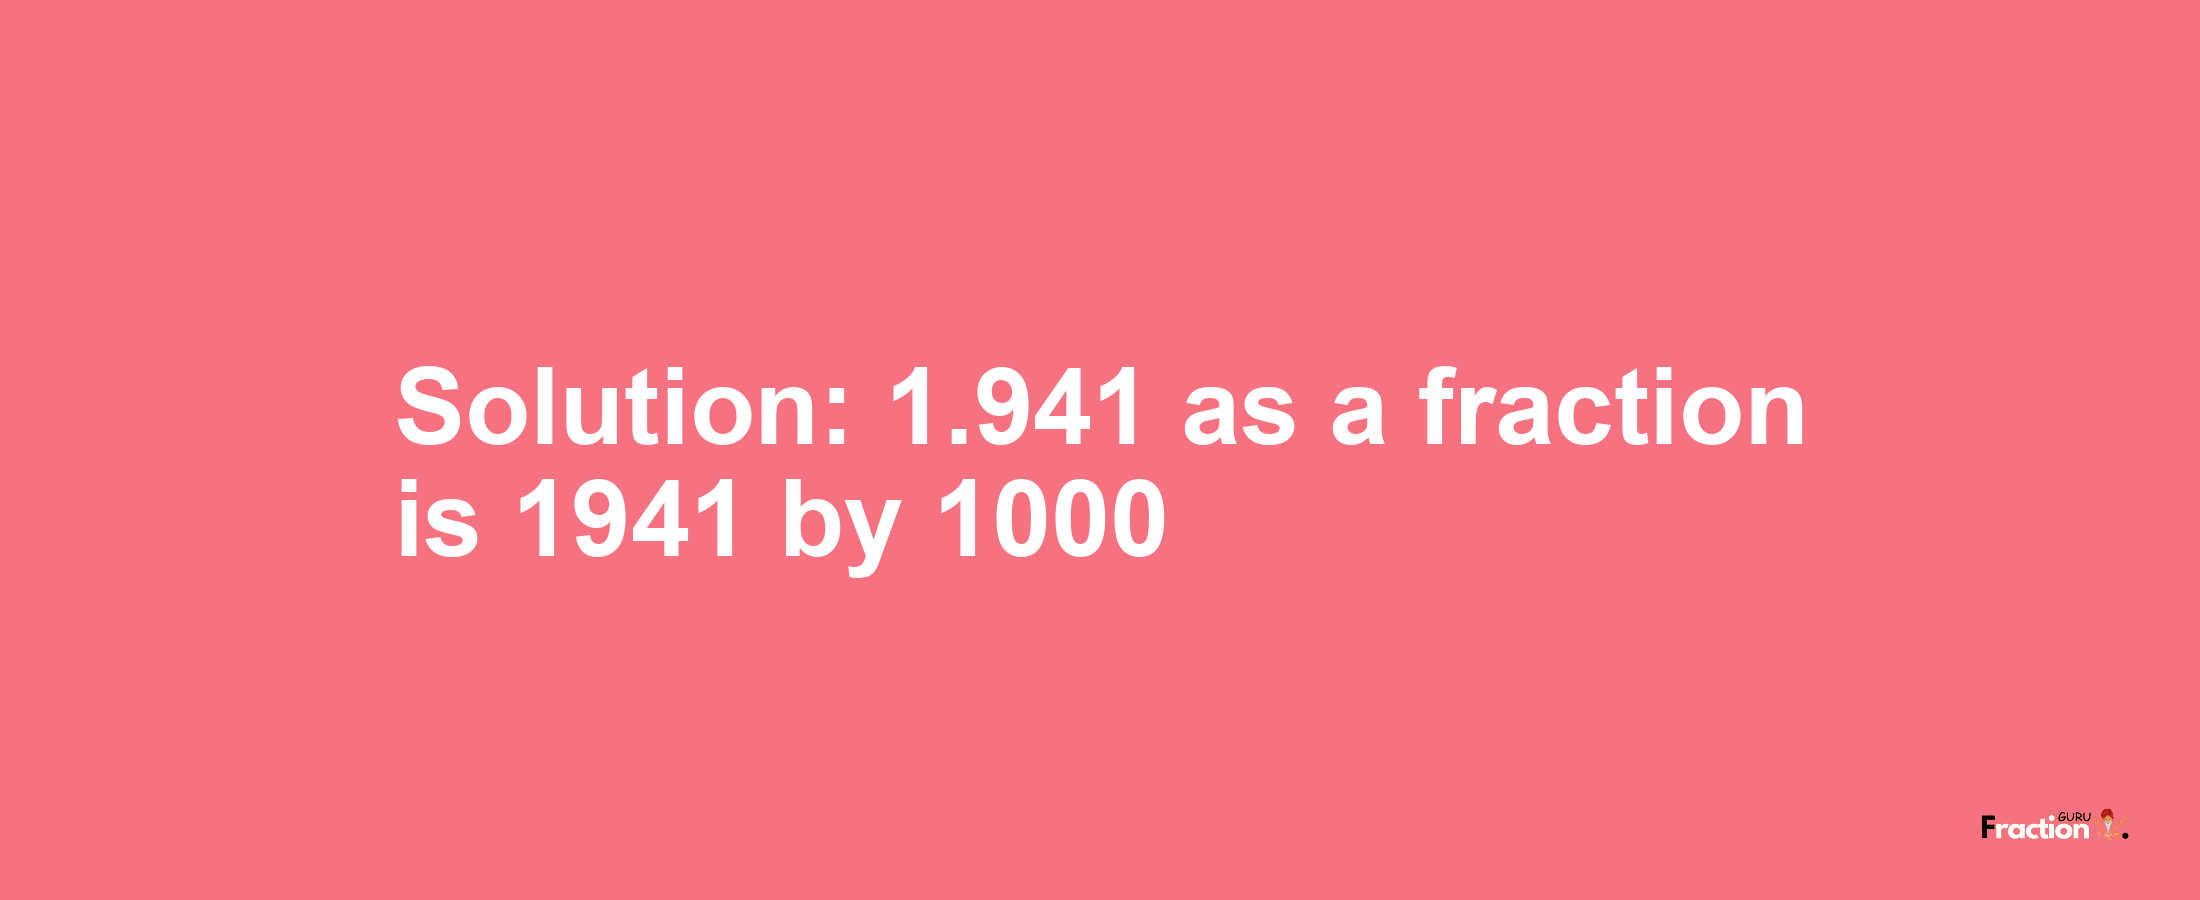 Solution:1.941 as a fraction is 1941/1000